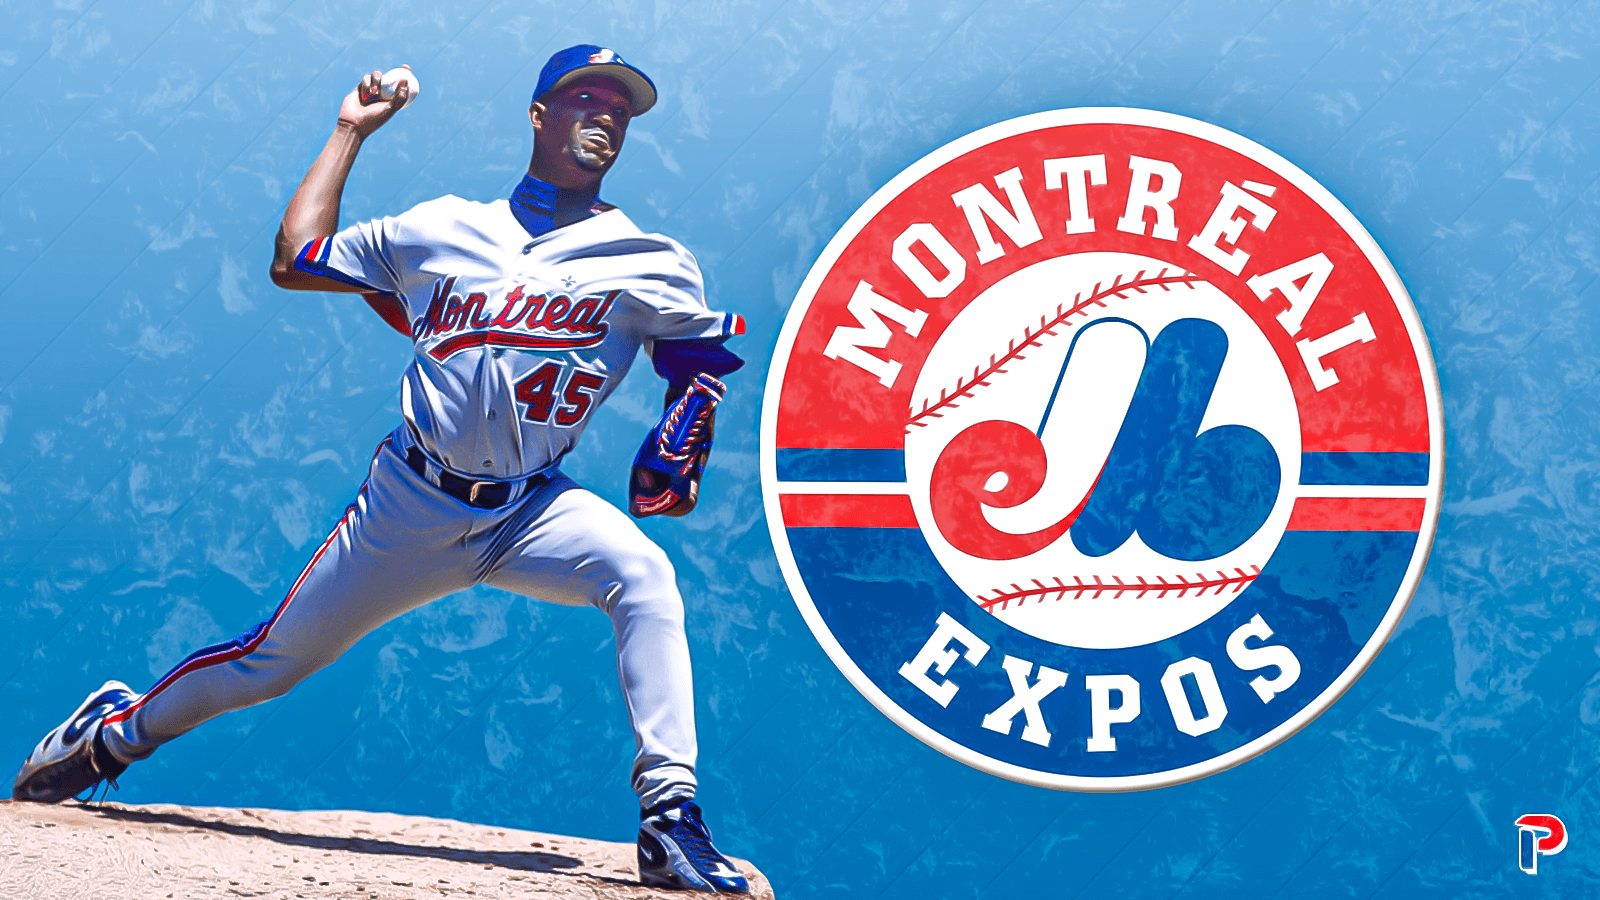 The Montreal Expos in 2020, Pt. 1 - 1994 and the beginning of the